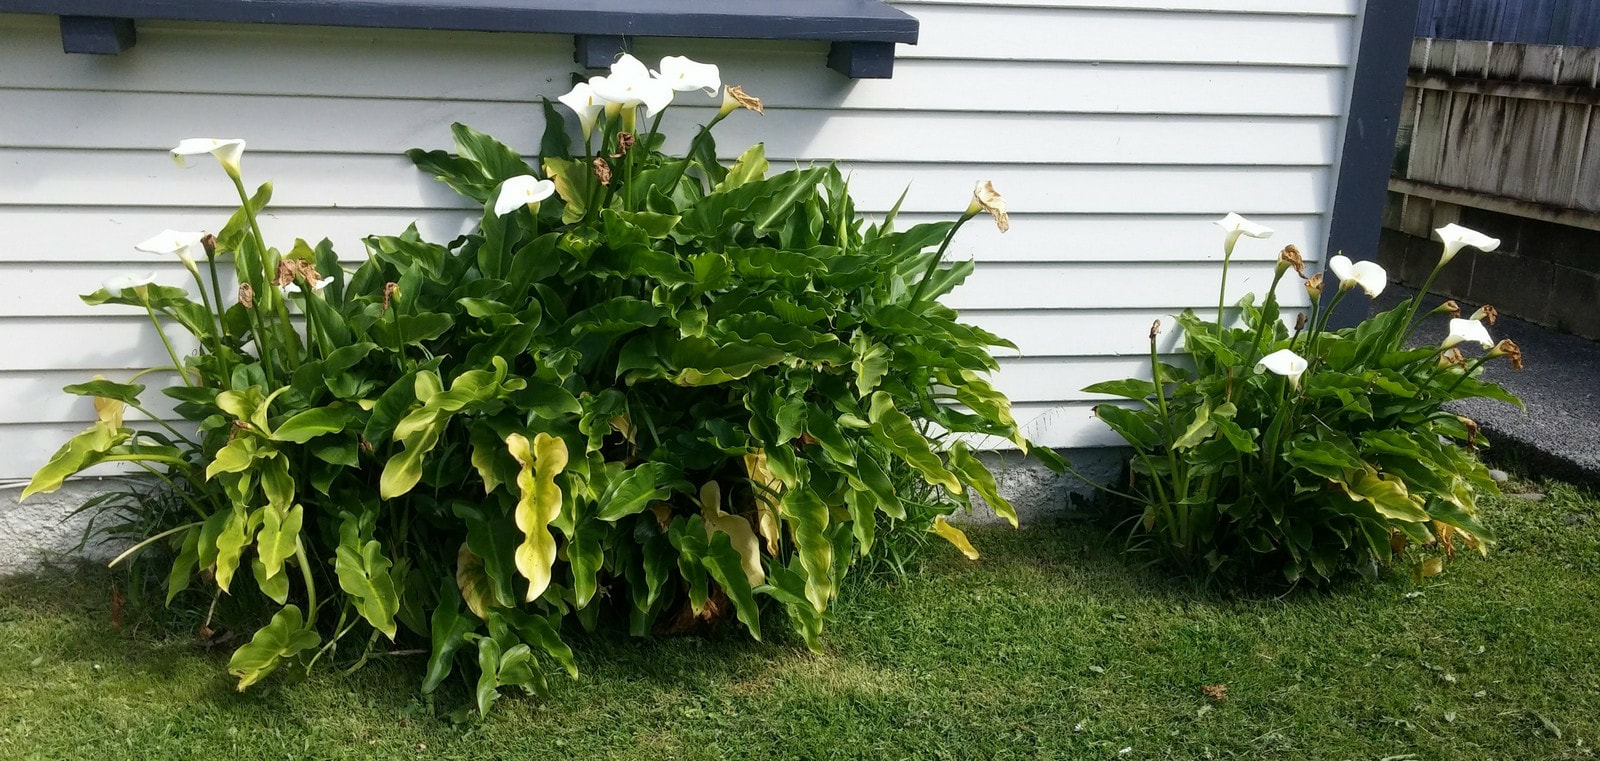 Arum lilies by the house